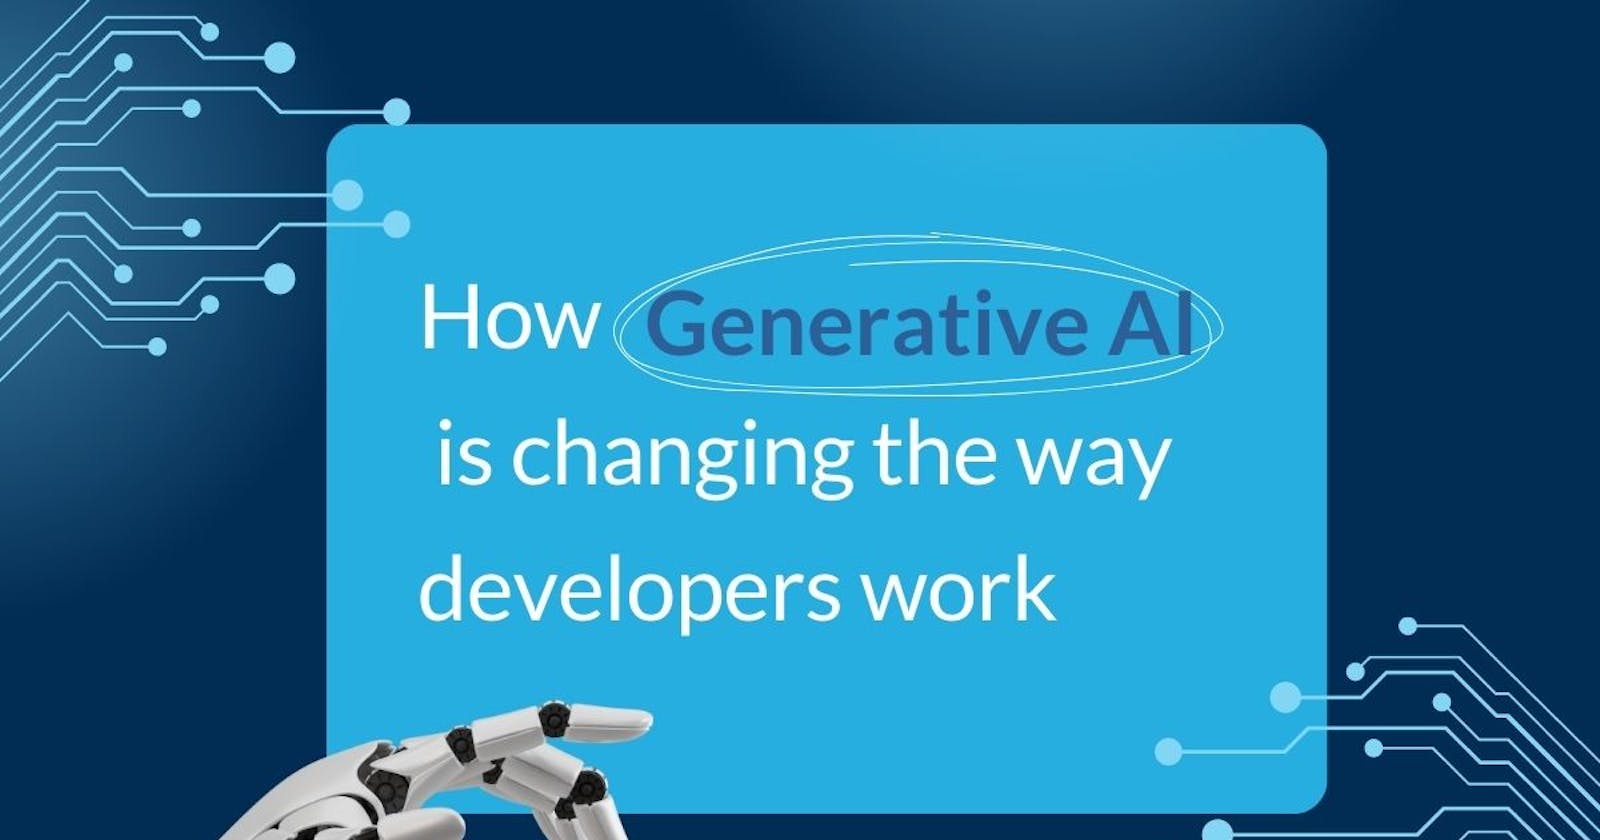 How Does Generative AI Impact Software Engineering?